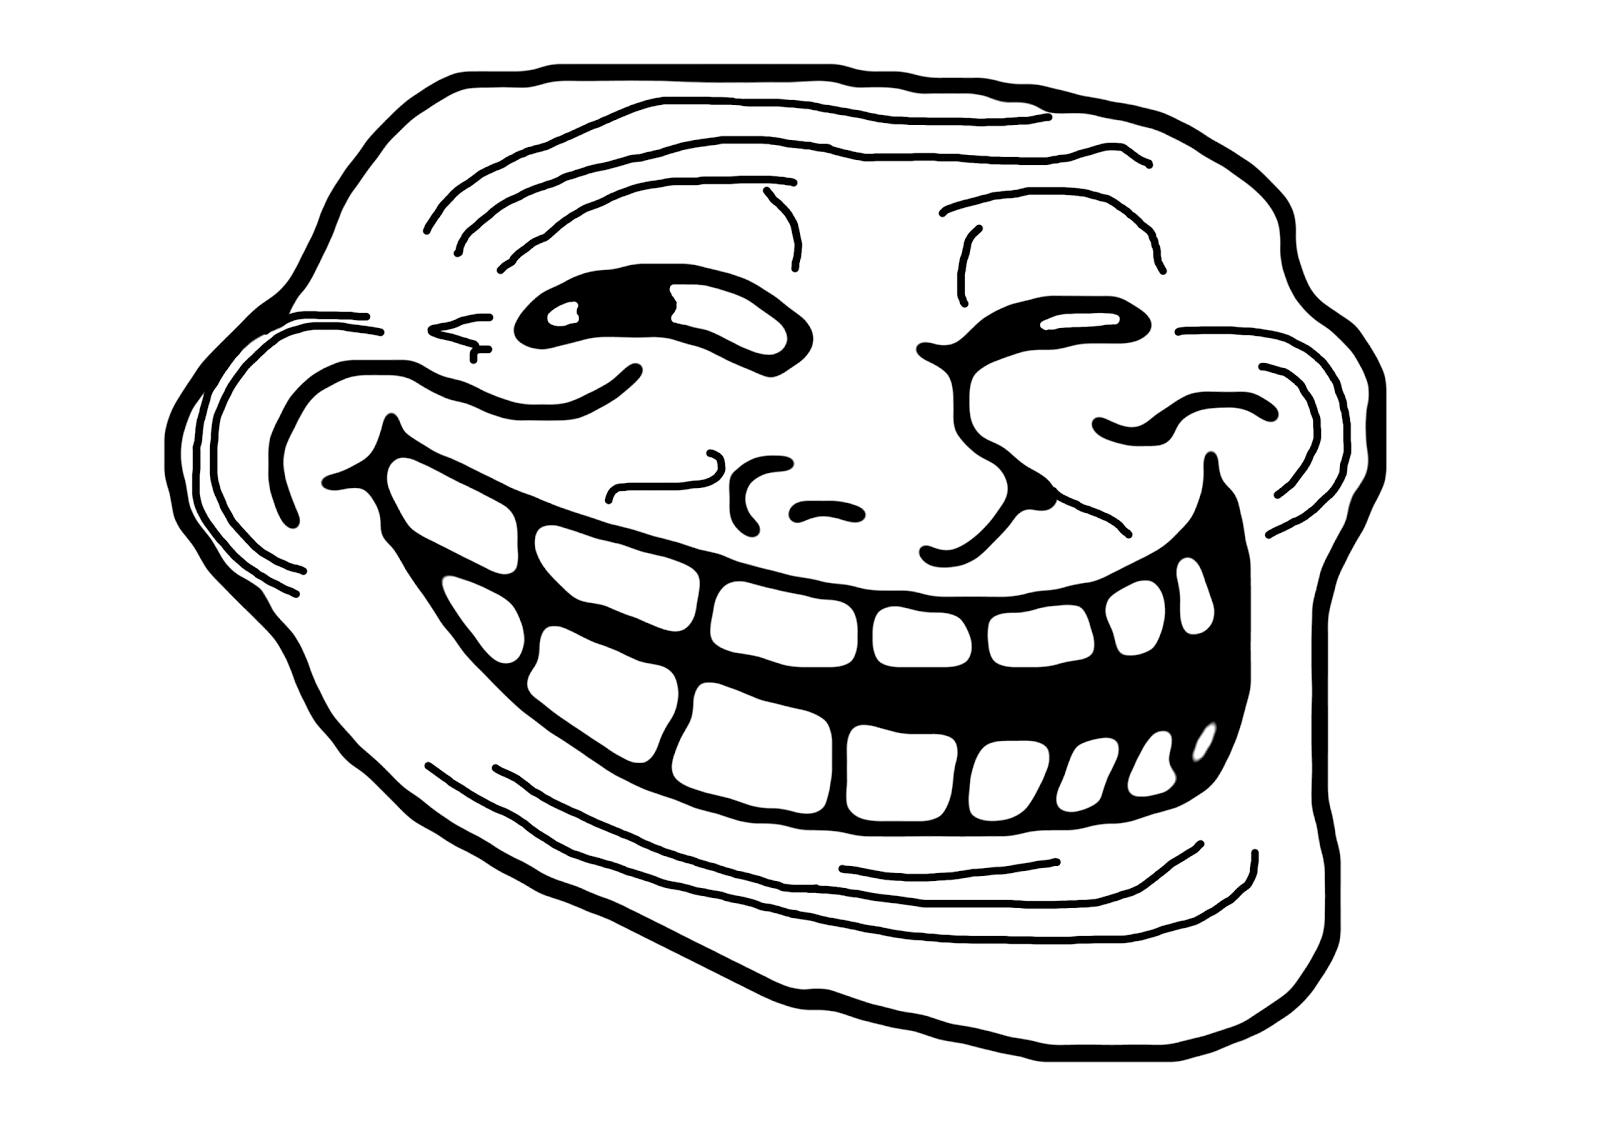 Troll face - Photo albums of